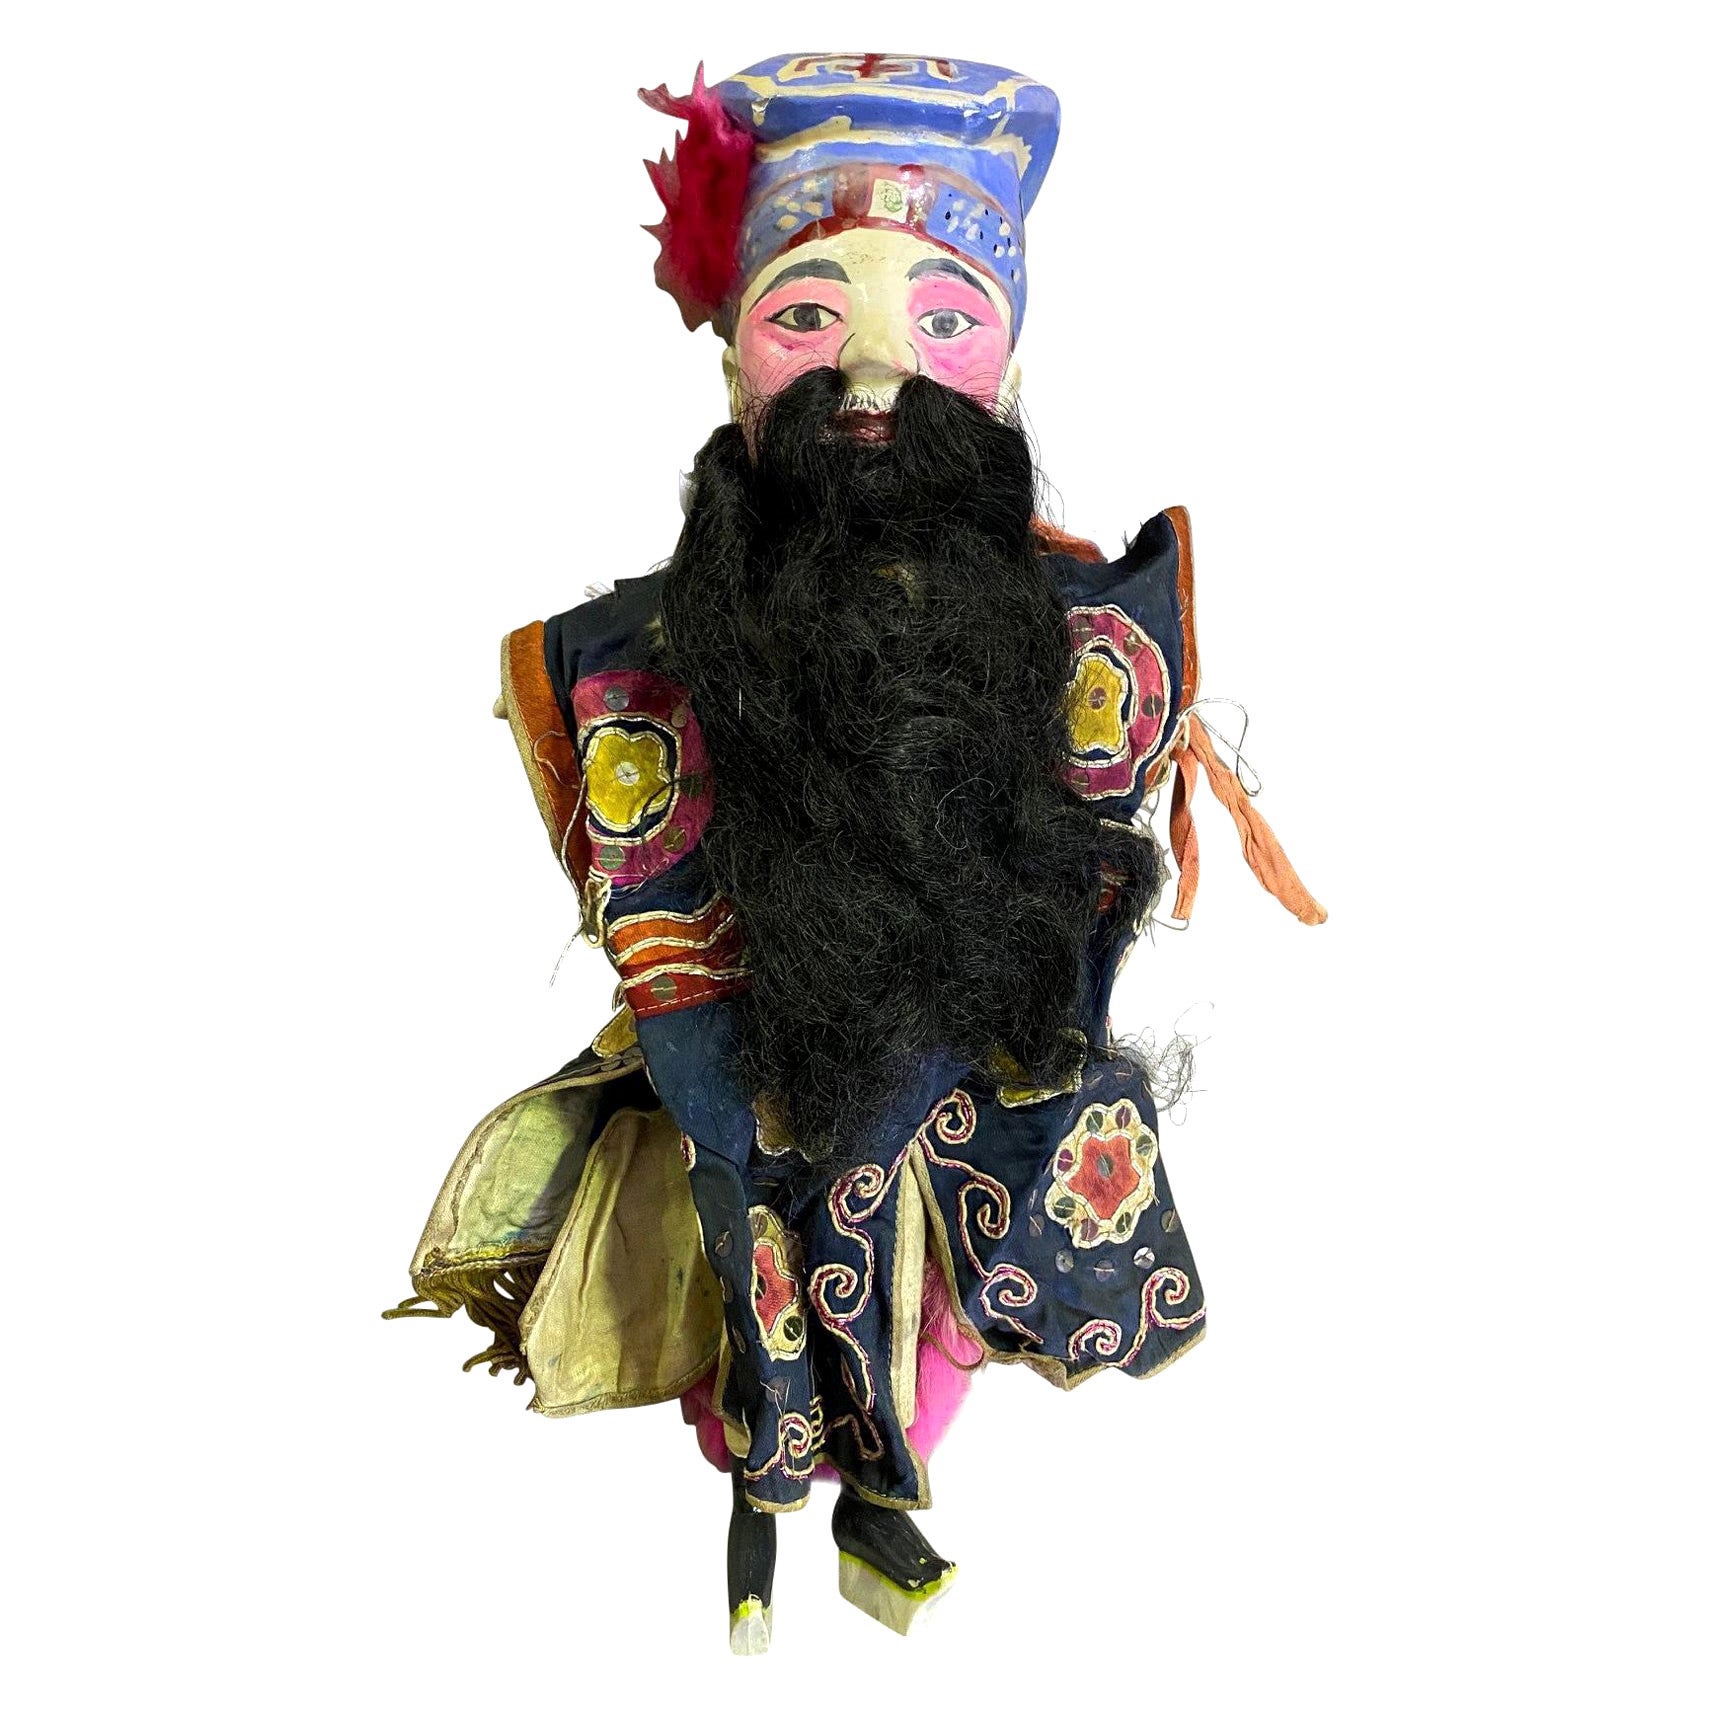 Chinese Peking Opera Theatre Puppet Marionette Doll, Early 1900s